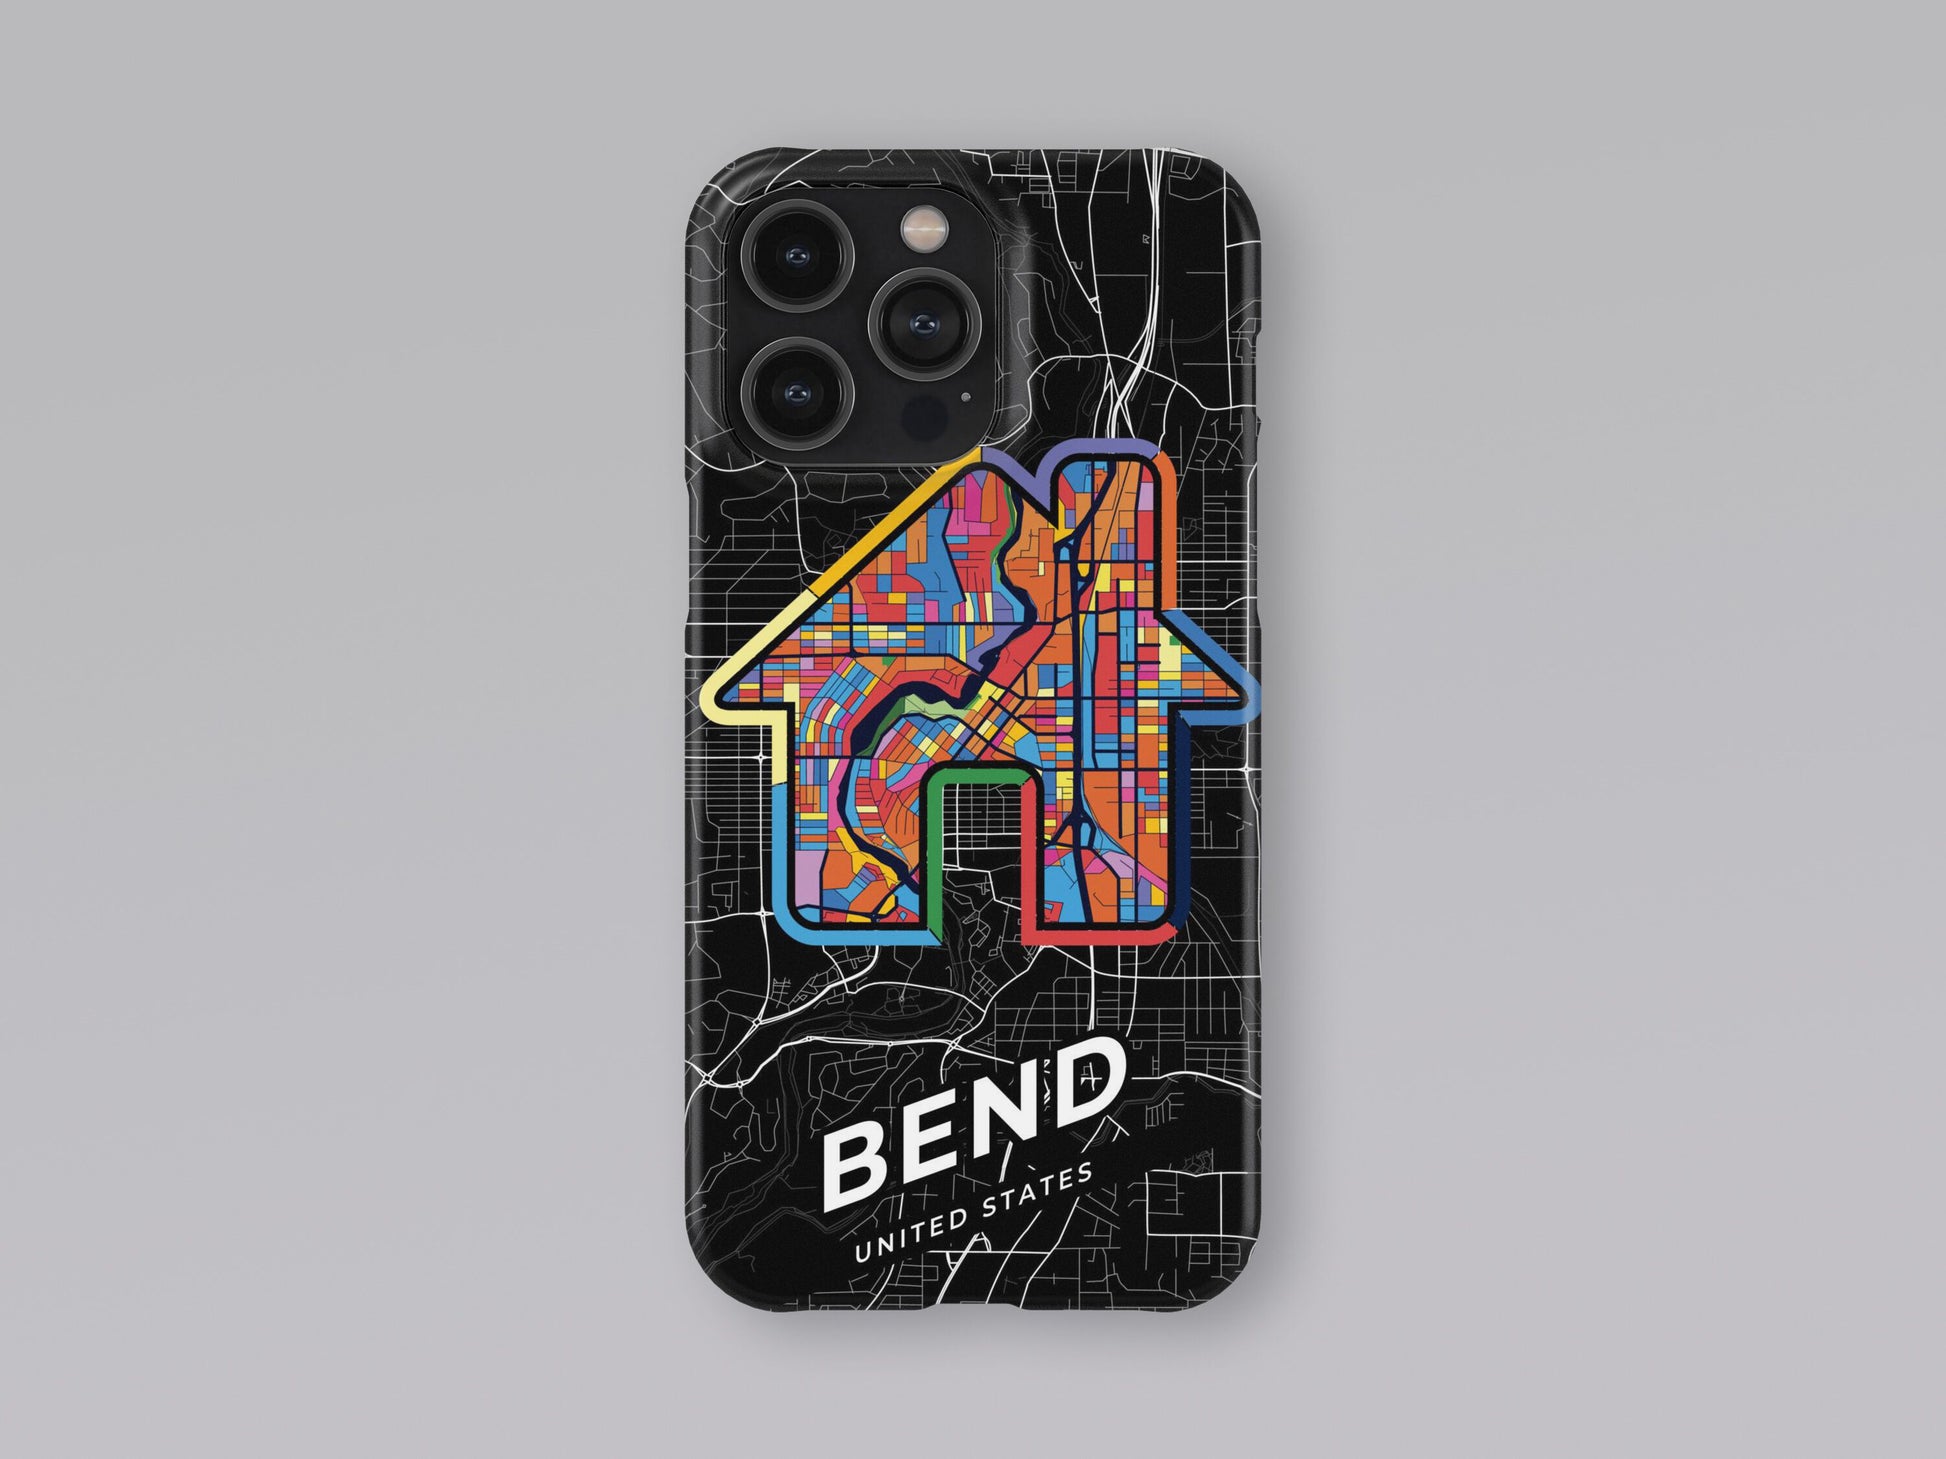 Bend Oregon slim phone case with colorful icon. Birthday, wedding or housewarming gift. Couple match cases. 3